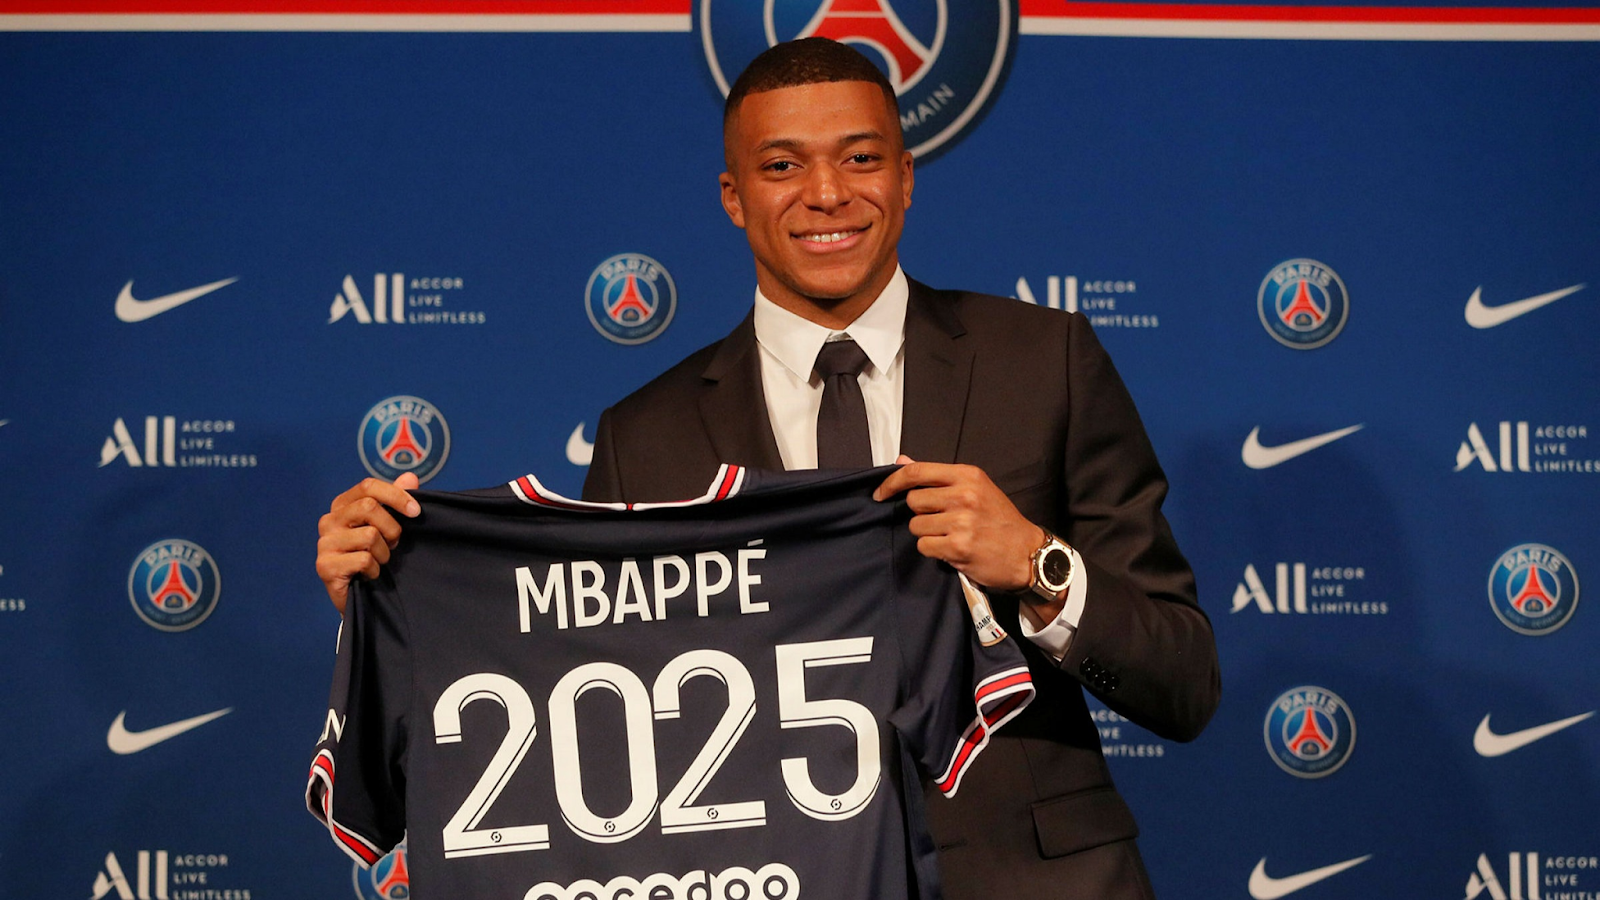 Kylian Mbappe Rumors and Controversies